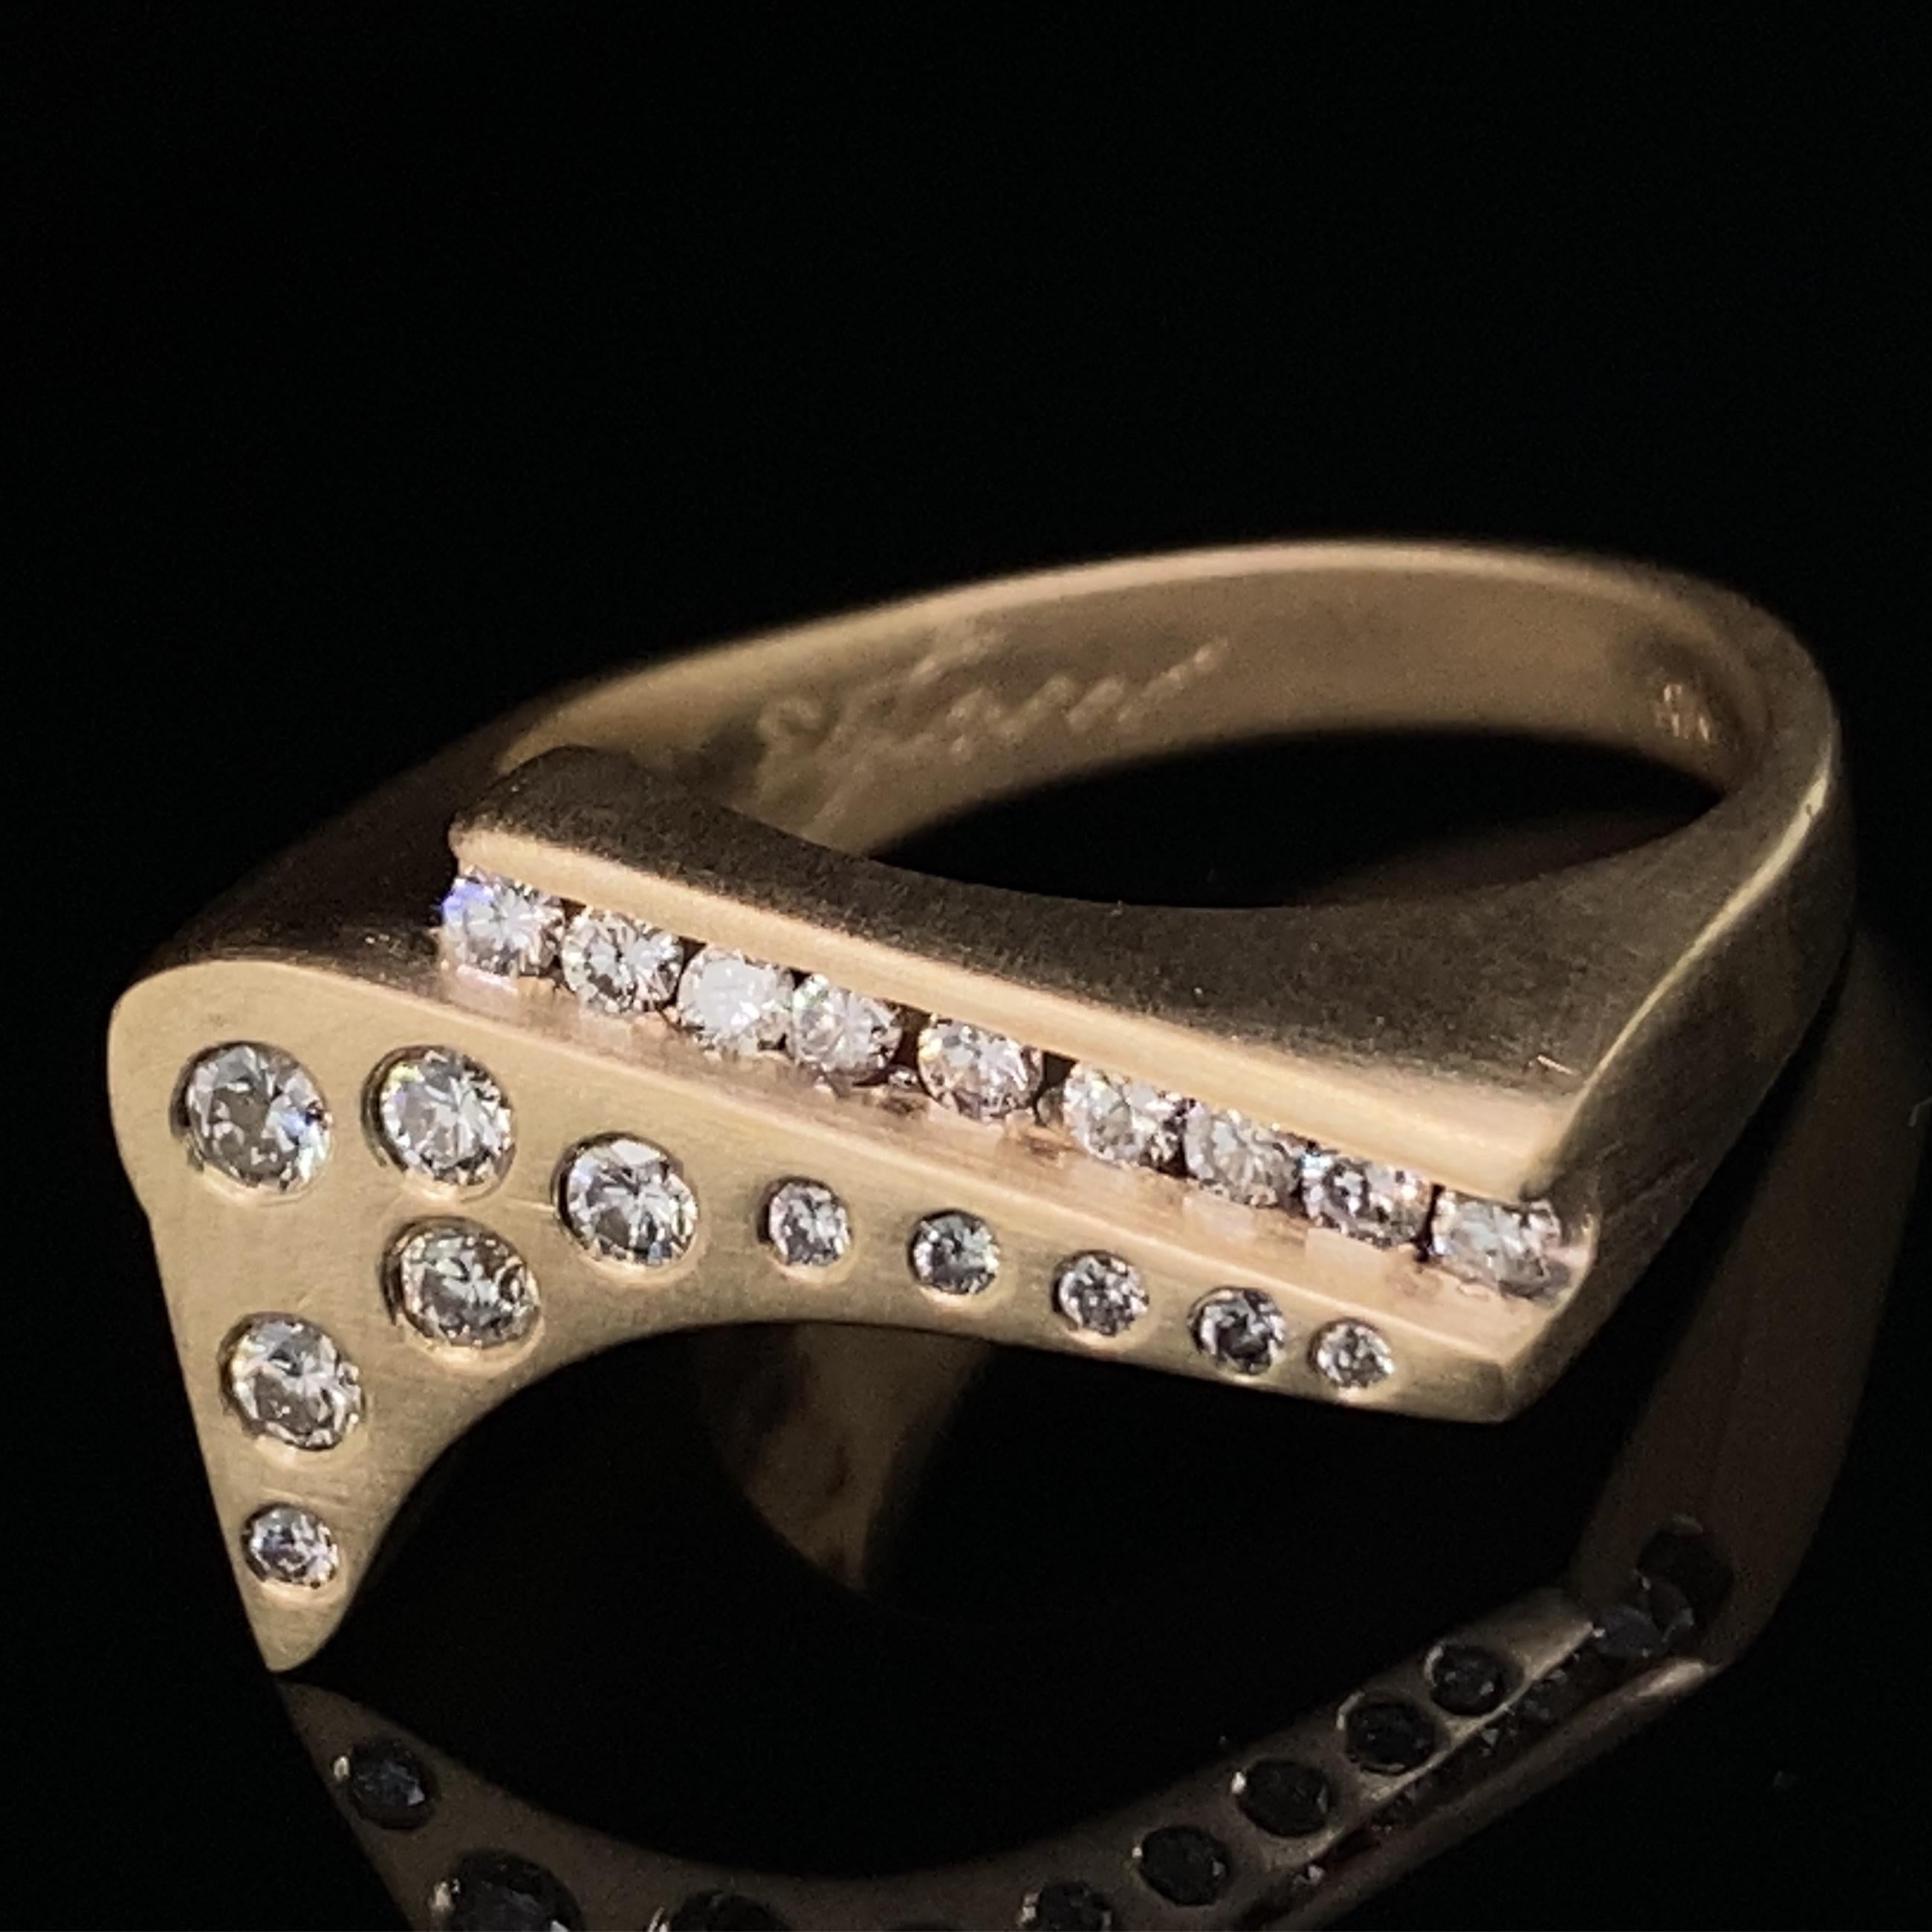 Eytan Brandes' Quarter Pipe ring combines a chaotic splash of flush-set diamonds and an orderly row of channel-set diamonds on a  modernist, eye-catching ring in satiny 18 karat yellow gold.

The twenty diamonds are all natural, earth-mined full cut